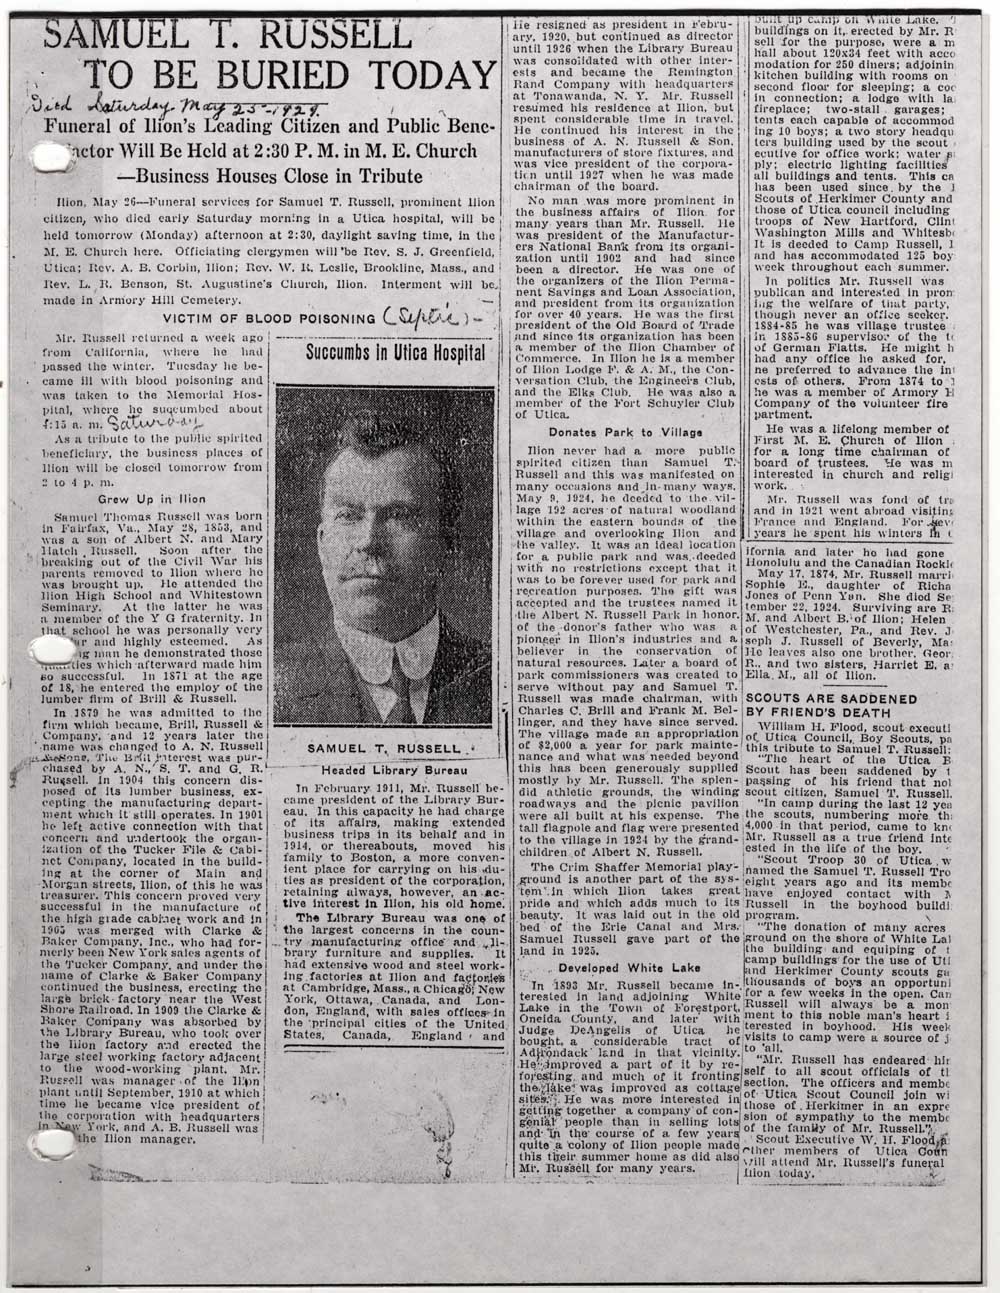 russell samuel t obit may 25 1929 005 funeral may 26 1929